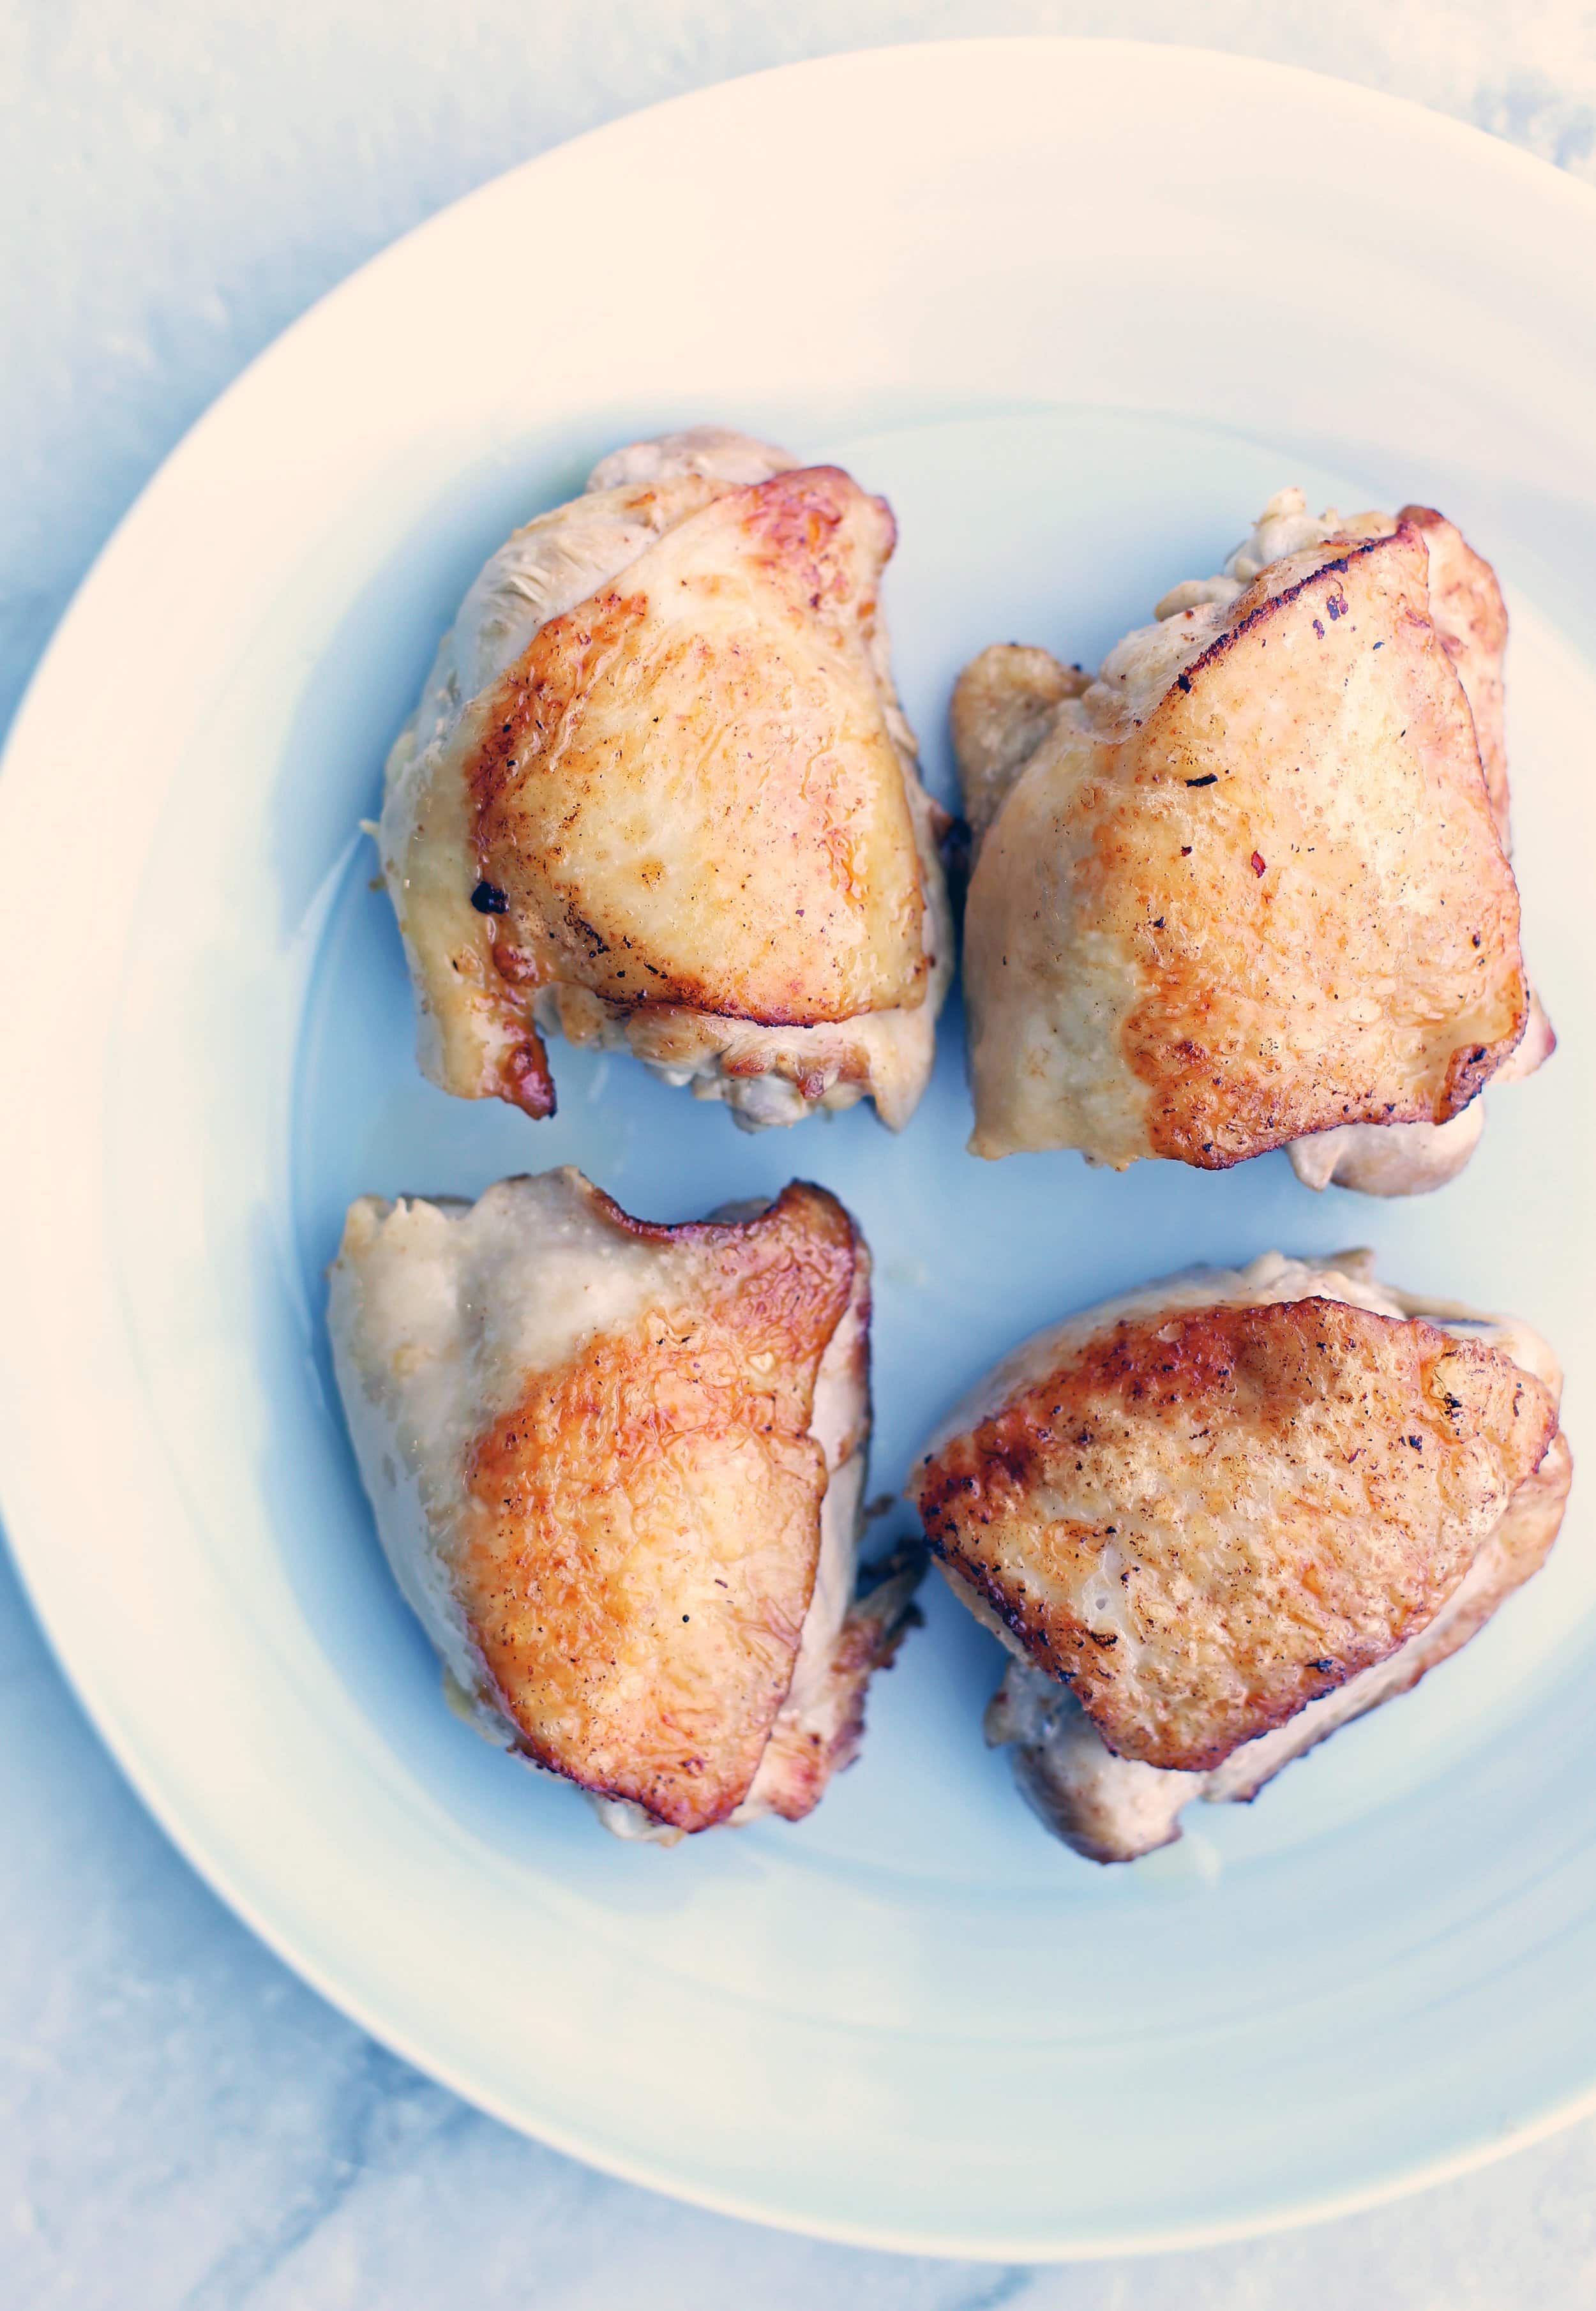 Four bone-in chicken thighs with seared golden-brown skin on a plate.